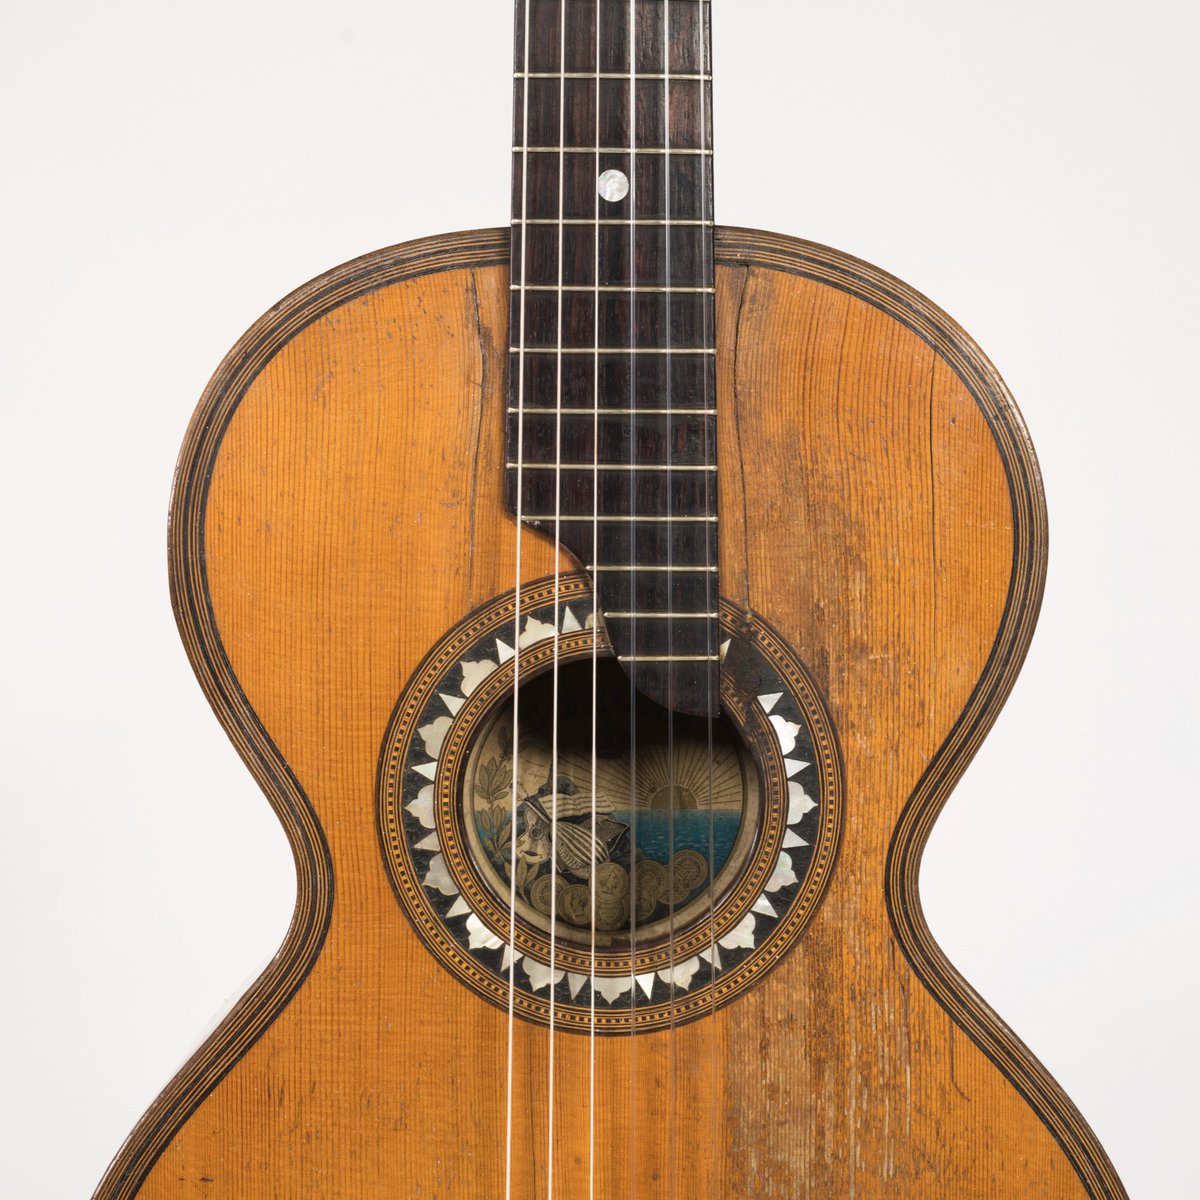 New install! ⭐ April’s acquisition of the month is this well-loved parlor guitar made during the turn of the twentieth century. This guitar, made of birdseye maple, spruce, and pine, was played in Chile for most of its life.